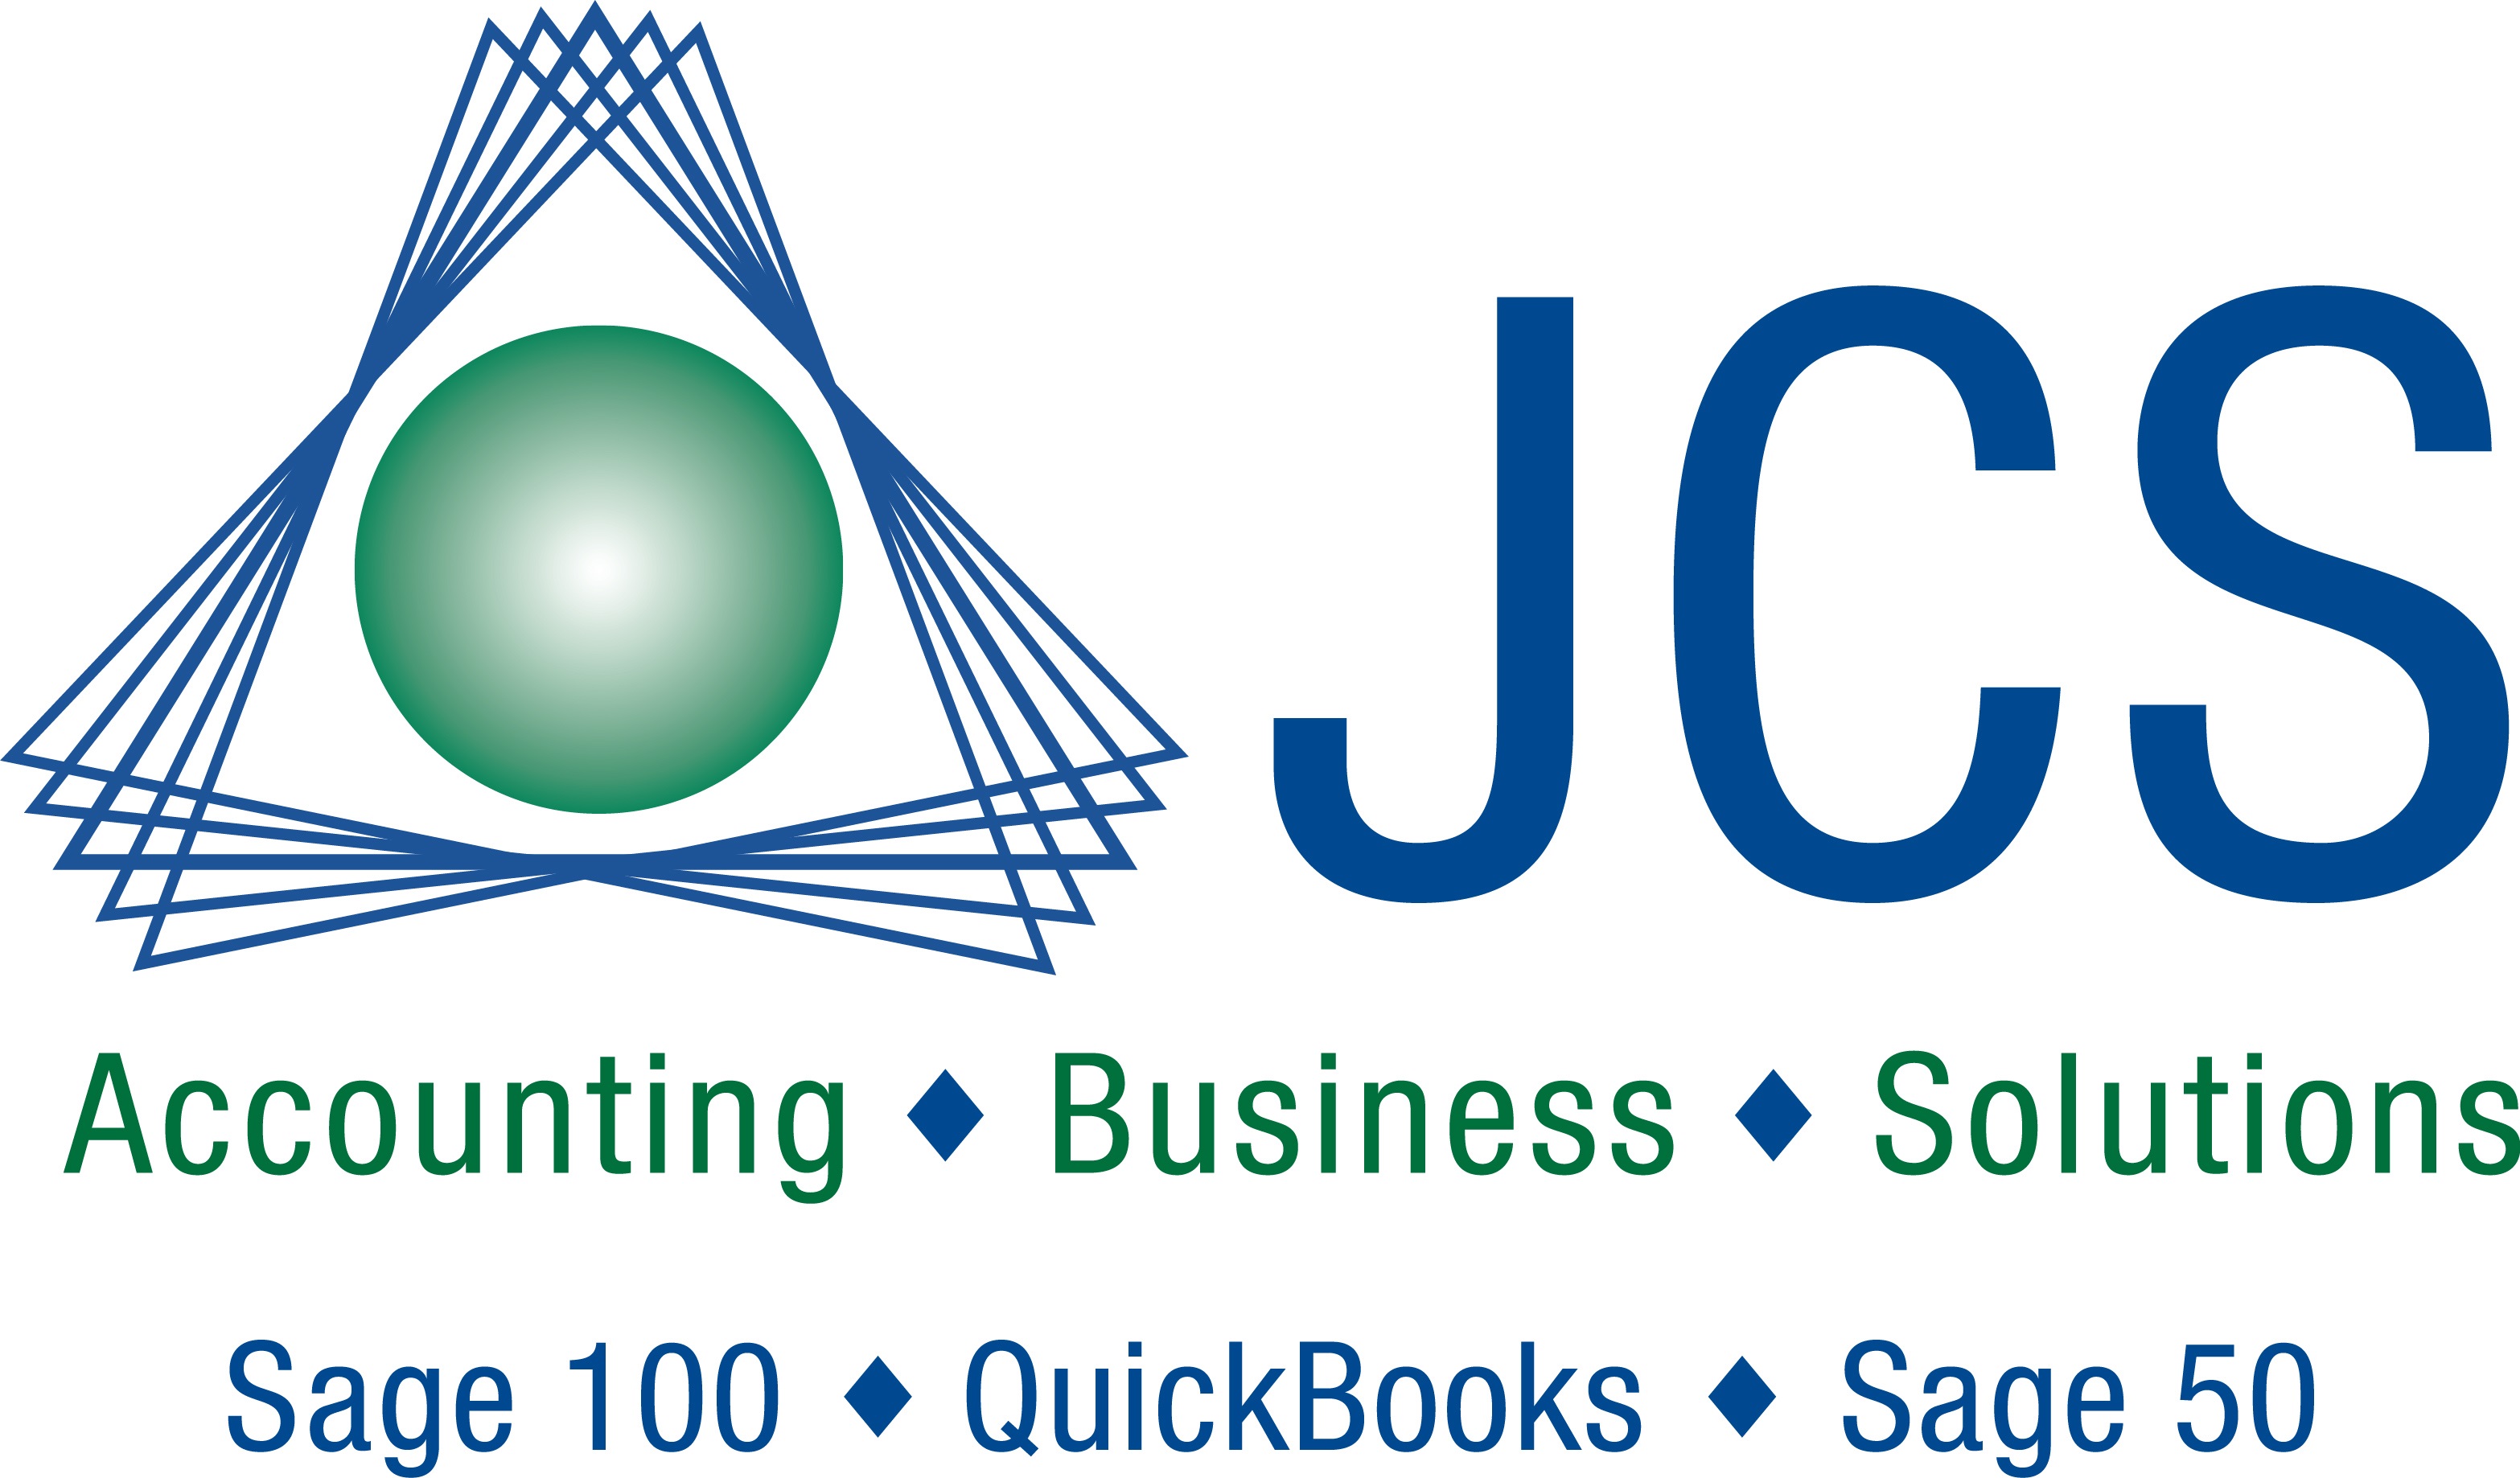 Accounting Business Solutions by JCS Builds on Momentum of WBENC Expo and Sage 100 with All Things Manufacturing and Inside/Outside Sales CRM Software Tools Webinars